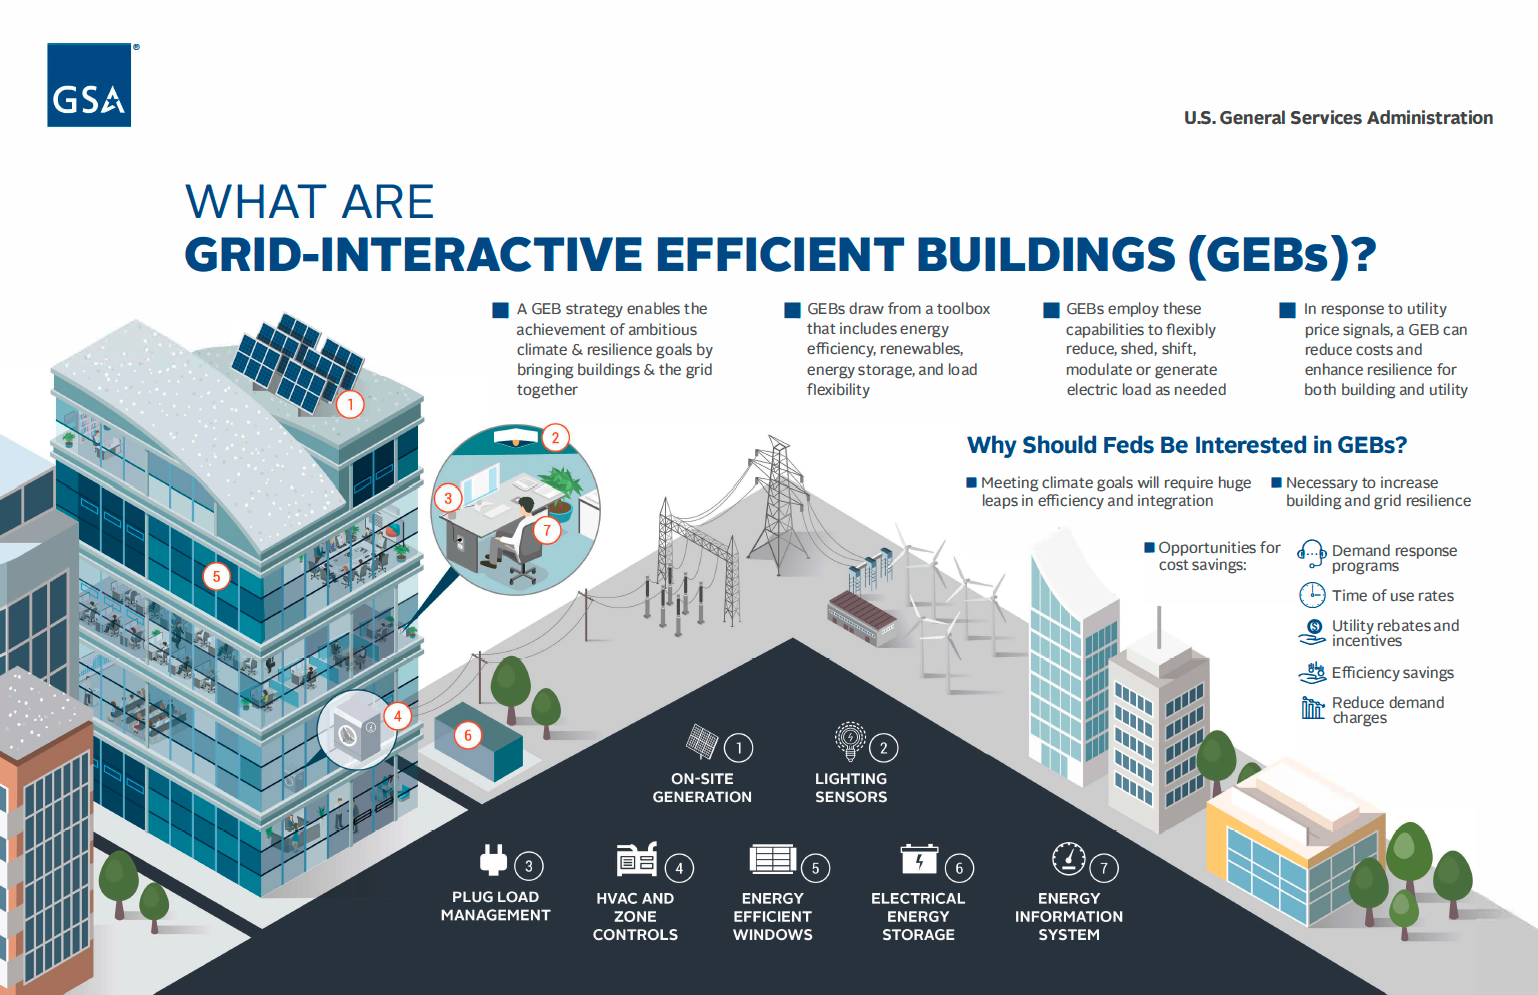 U.S. General Services Administration Grid-Interactive Efficient Buildings Infographic.